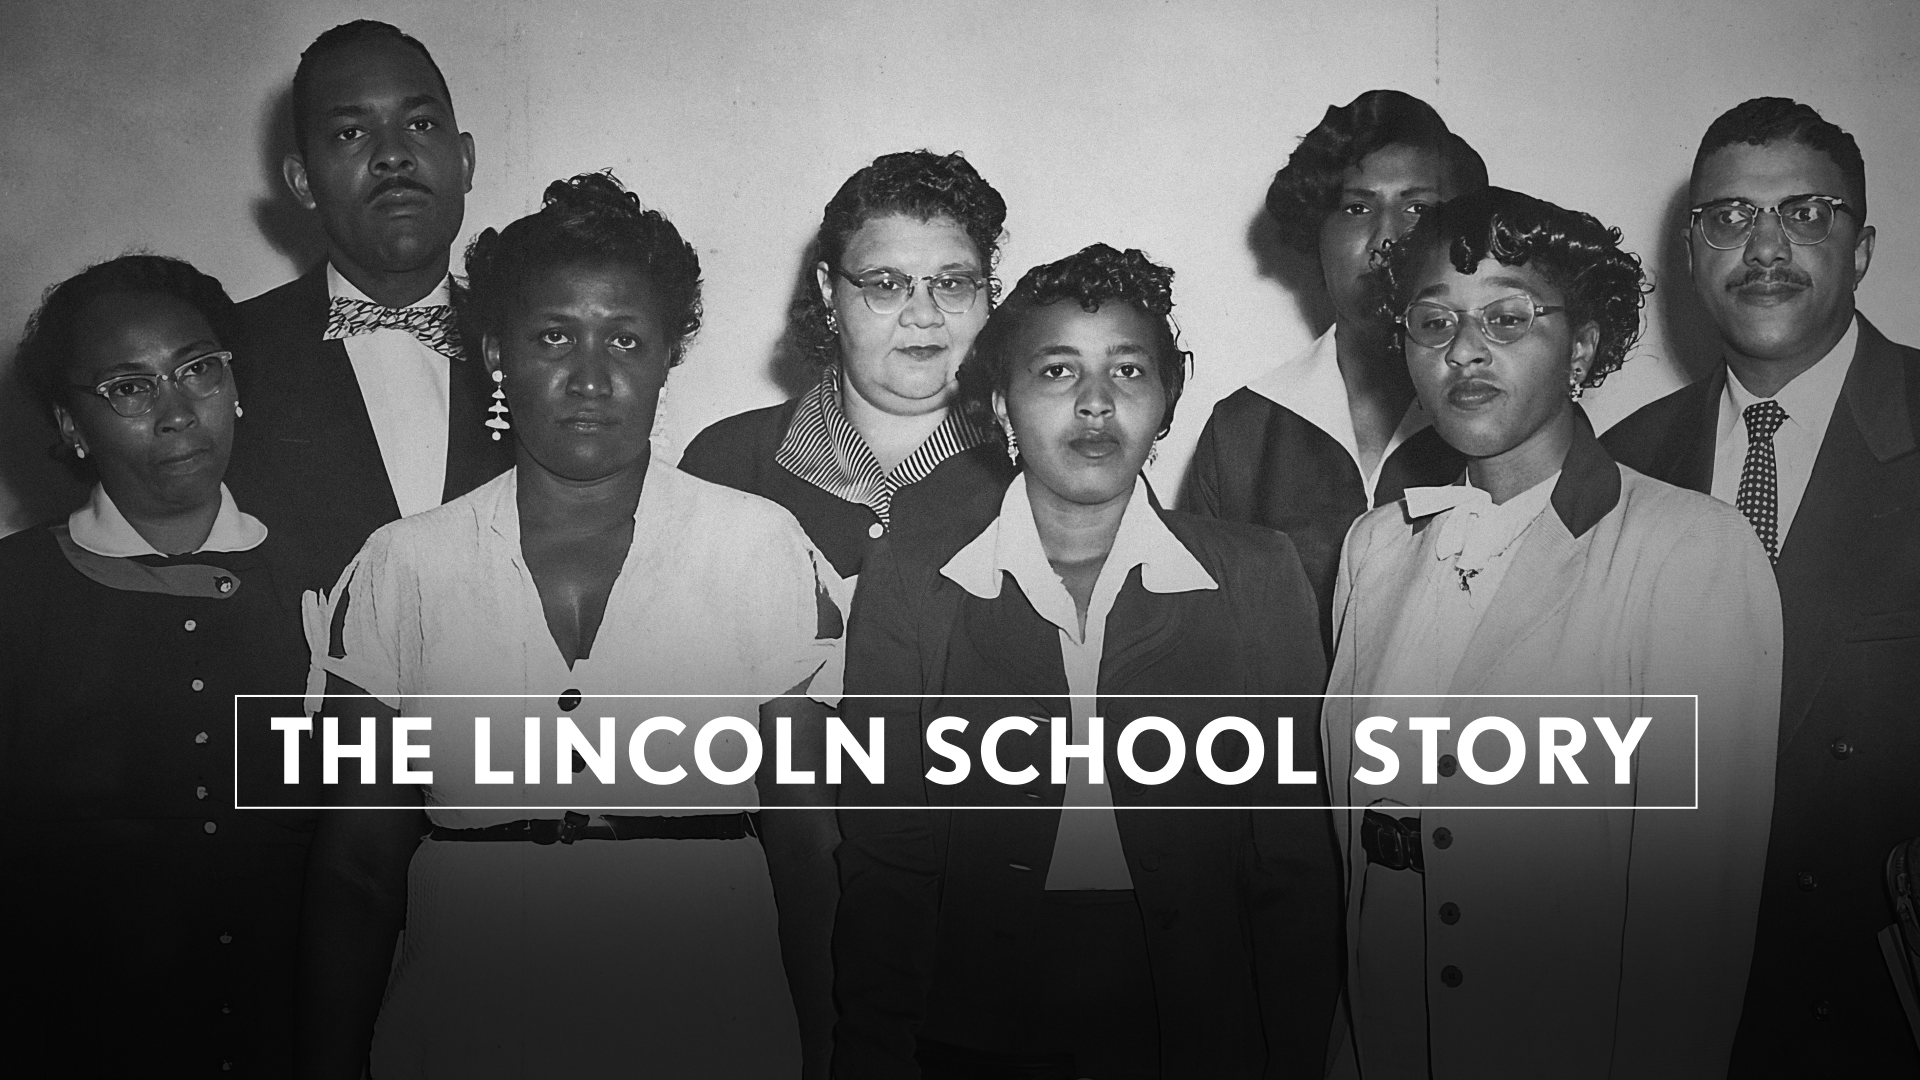 The five plaintiffs in Clemons v. Board of Education and their attorneys stand in court on Sept. 29, 1954 while on their precedent-shattering mission. Front row, left to right: Plaintiffs Elsie Steward, Roxie Clemons, Zella Cumberland and Gertrude Clemons. Back row, left to right: Attorney Russell L. Carter, plaintiff Norma Rollins and attorneys Constance Baker Motley and James H. McGee. Photo by Harvey Eugene Smith of AP